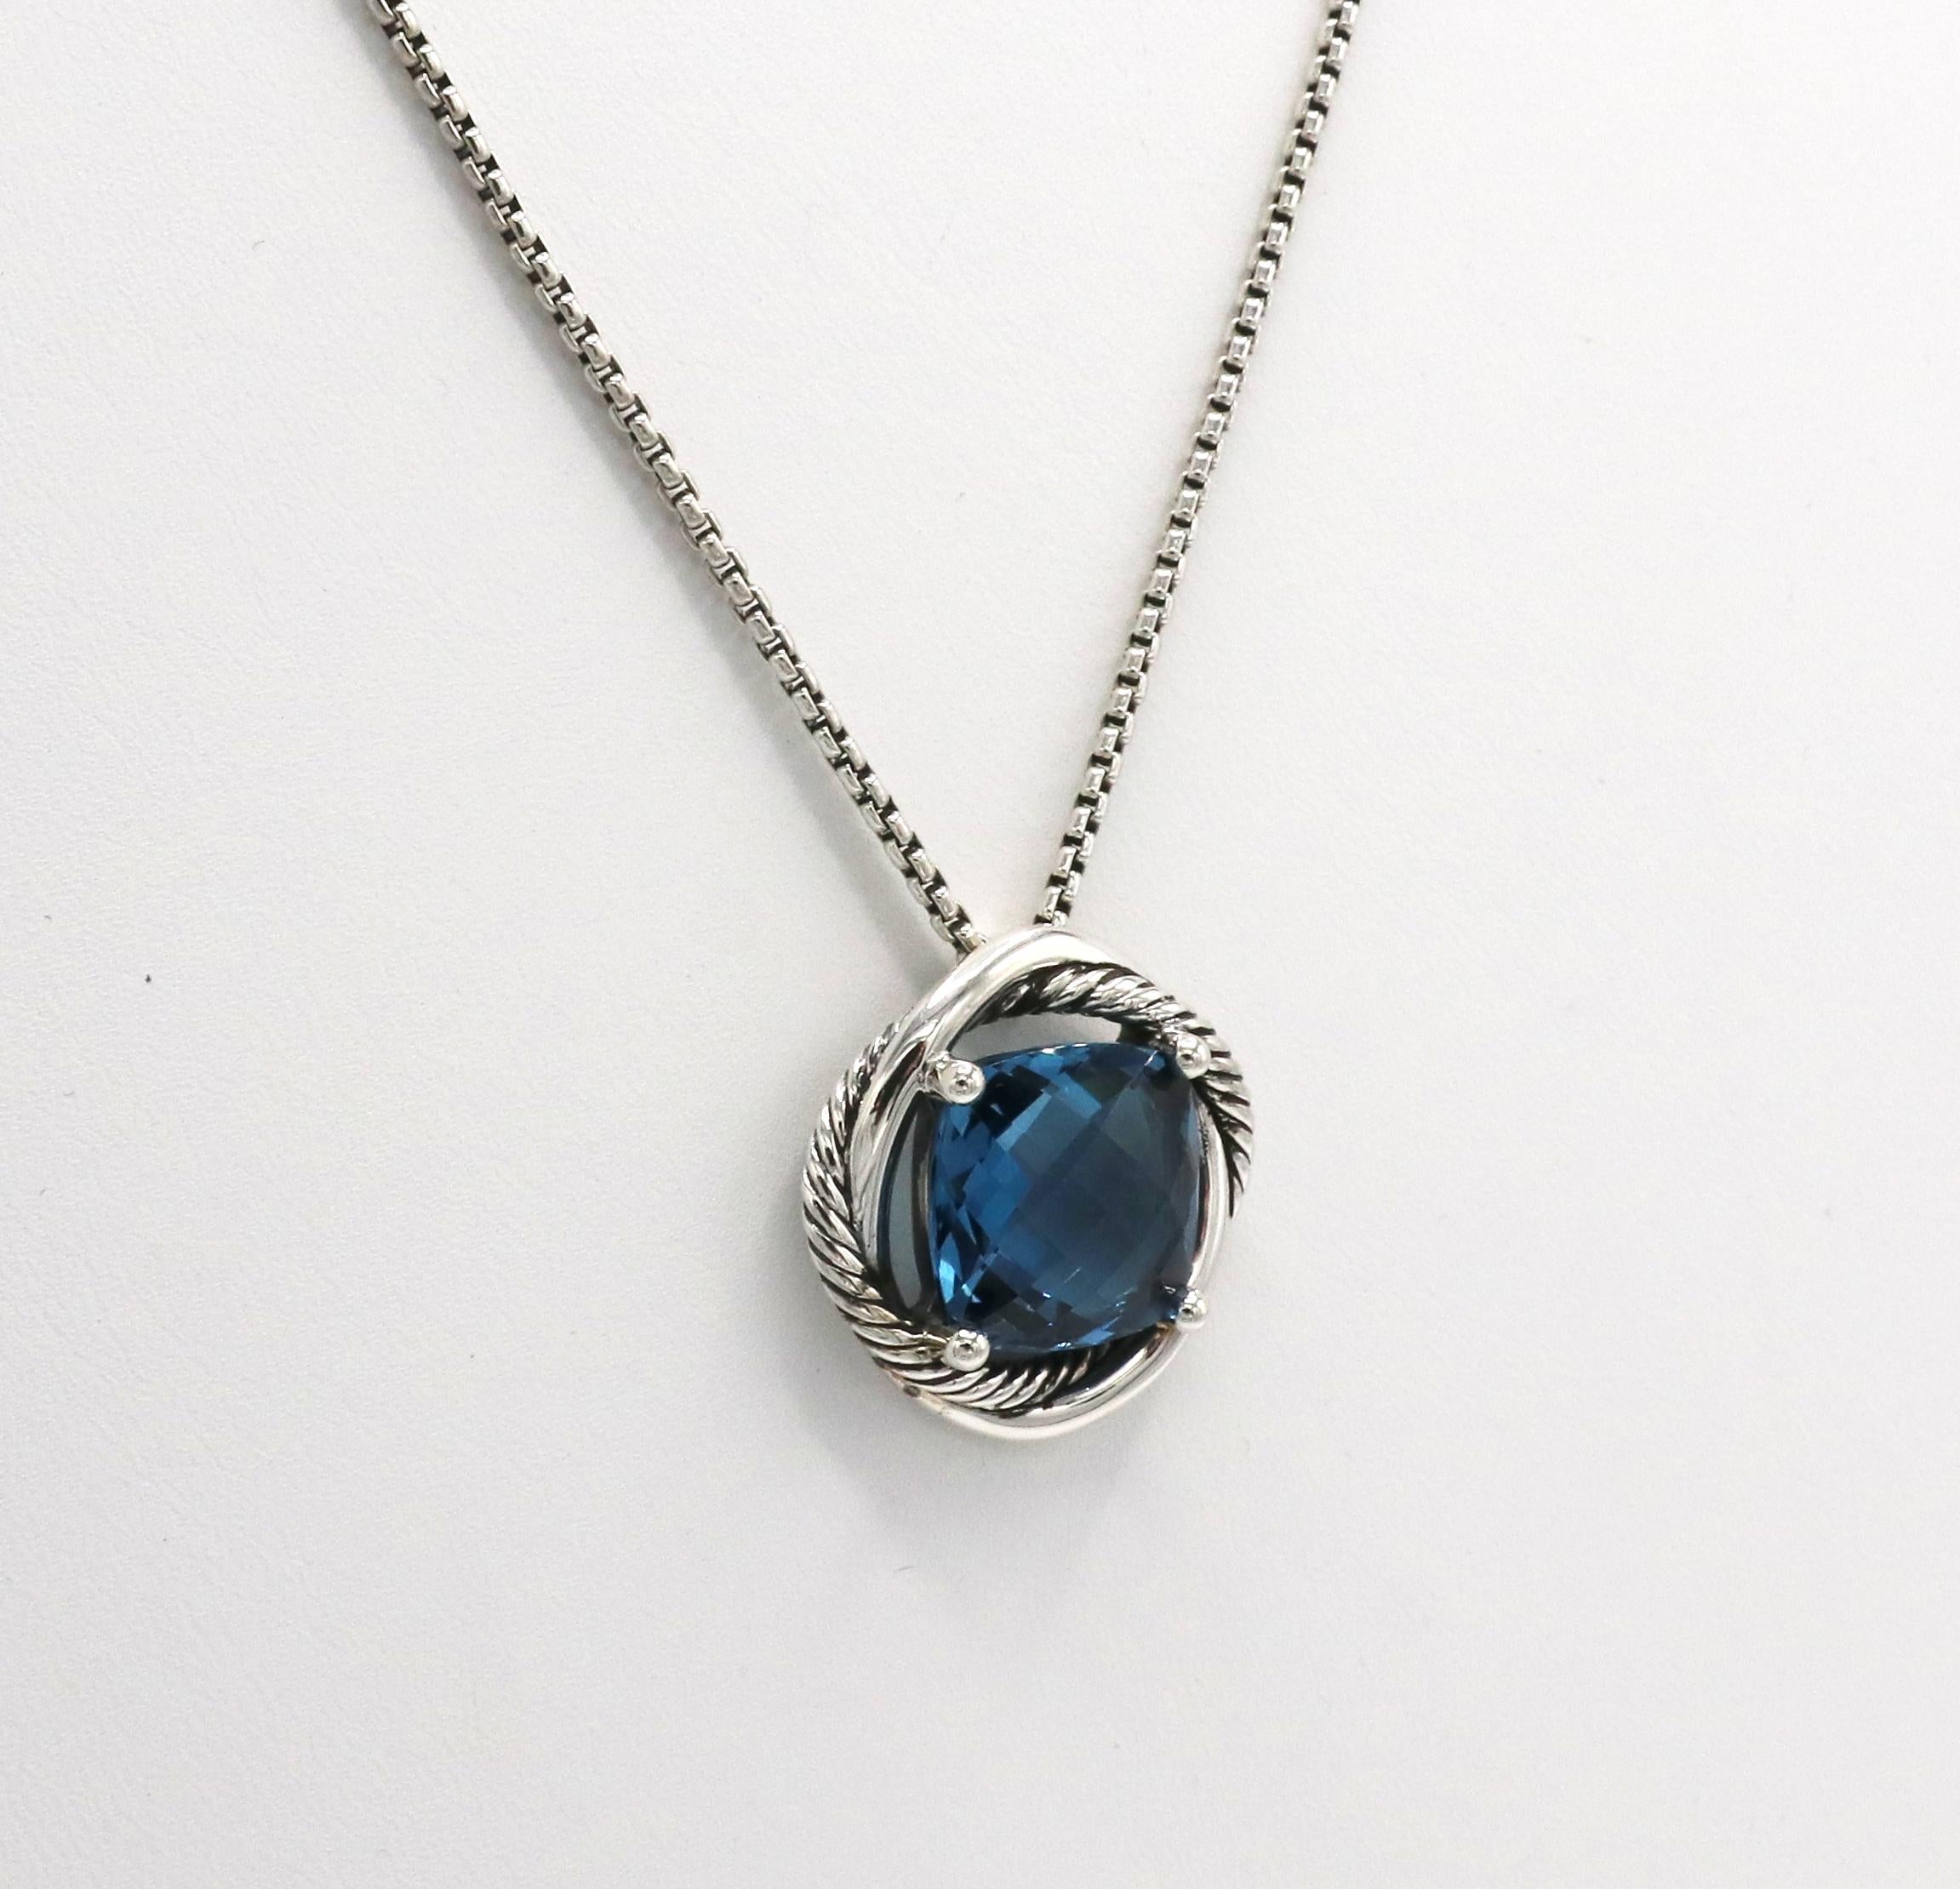 David Yurman Sterling Silver Blue Topaz Cable Infinity Pendant Necklace 
Metal: Sterling silver
Weight: 15.19 grams
Gemstone: Blue topaz, 13.5 x 13.5mm 
Pendant: 22 x 22mm
Chain: 18 inches, adjustable to 17 inches, 1mm wide
Signed: D.Y. 925
